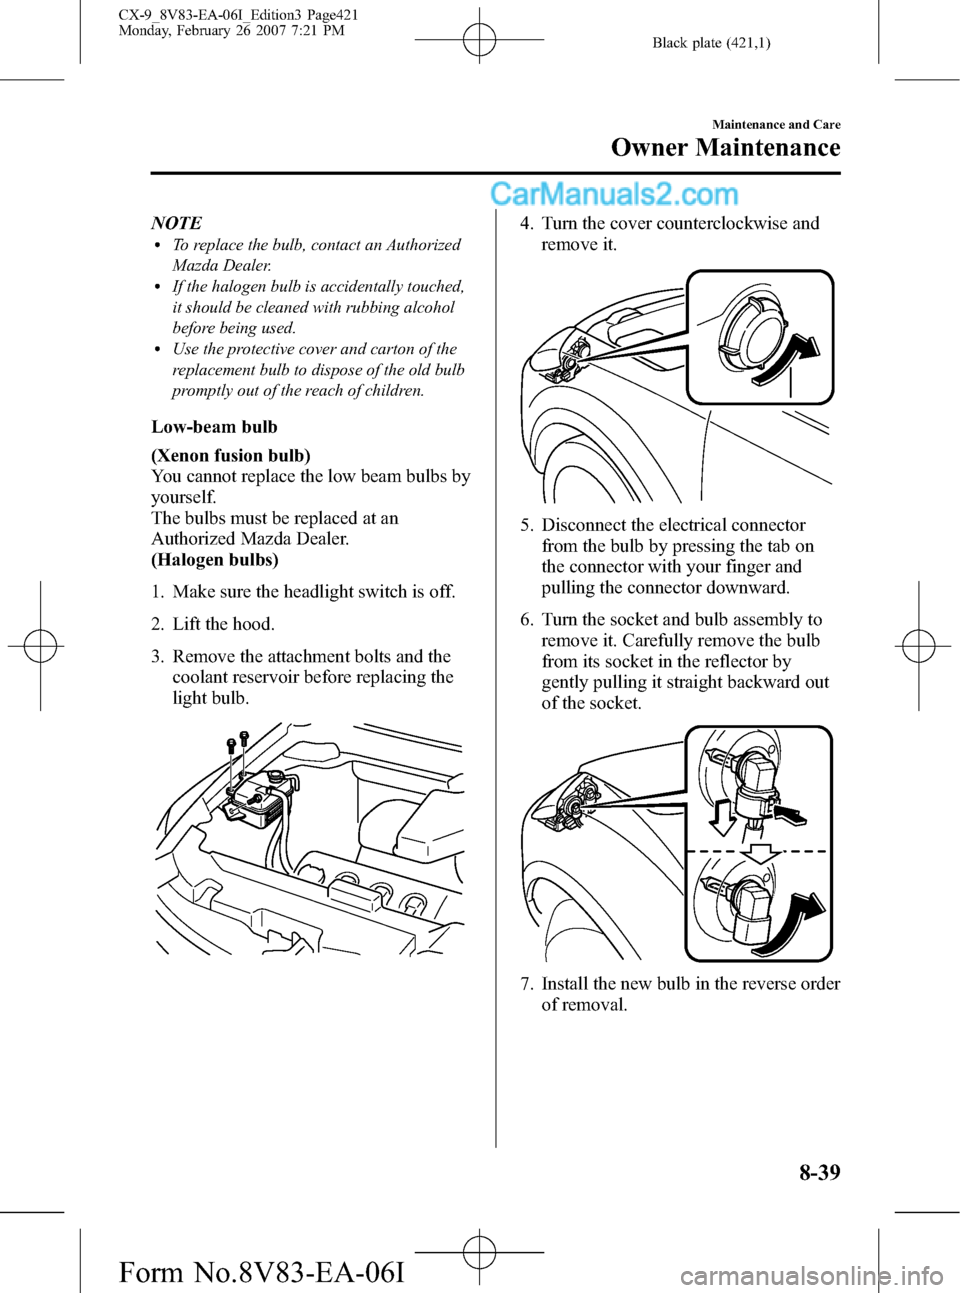 MAZDA MODEL CX-9 2007  Owners Manual (in English) Black plate (421,1)
NOTElTo replace the bulb, contact an Authorized
Mazda Dealer.
lIf the halogen bulb is accidentally touched,
it should be cleaned with rubbing alcohol
before being used.
lUse the pr